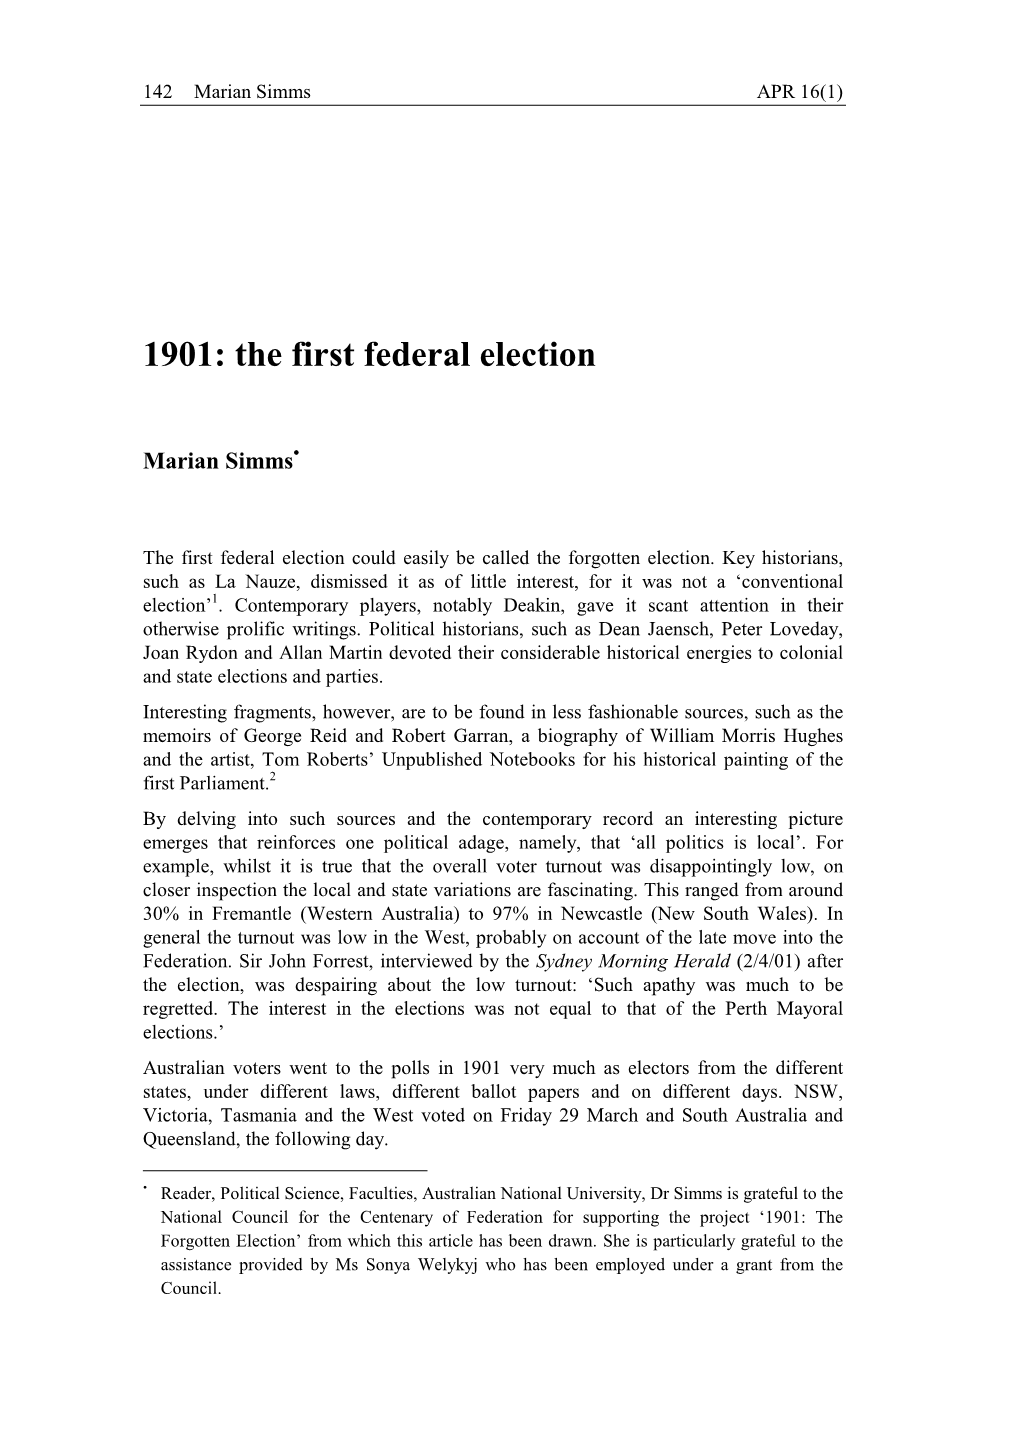 The First Federal Election